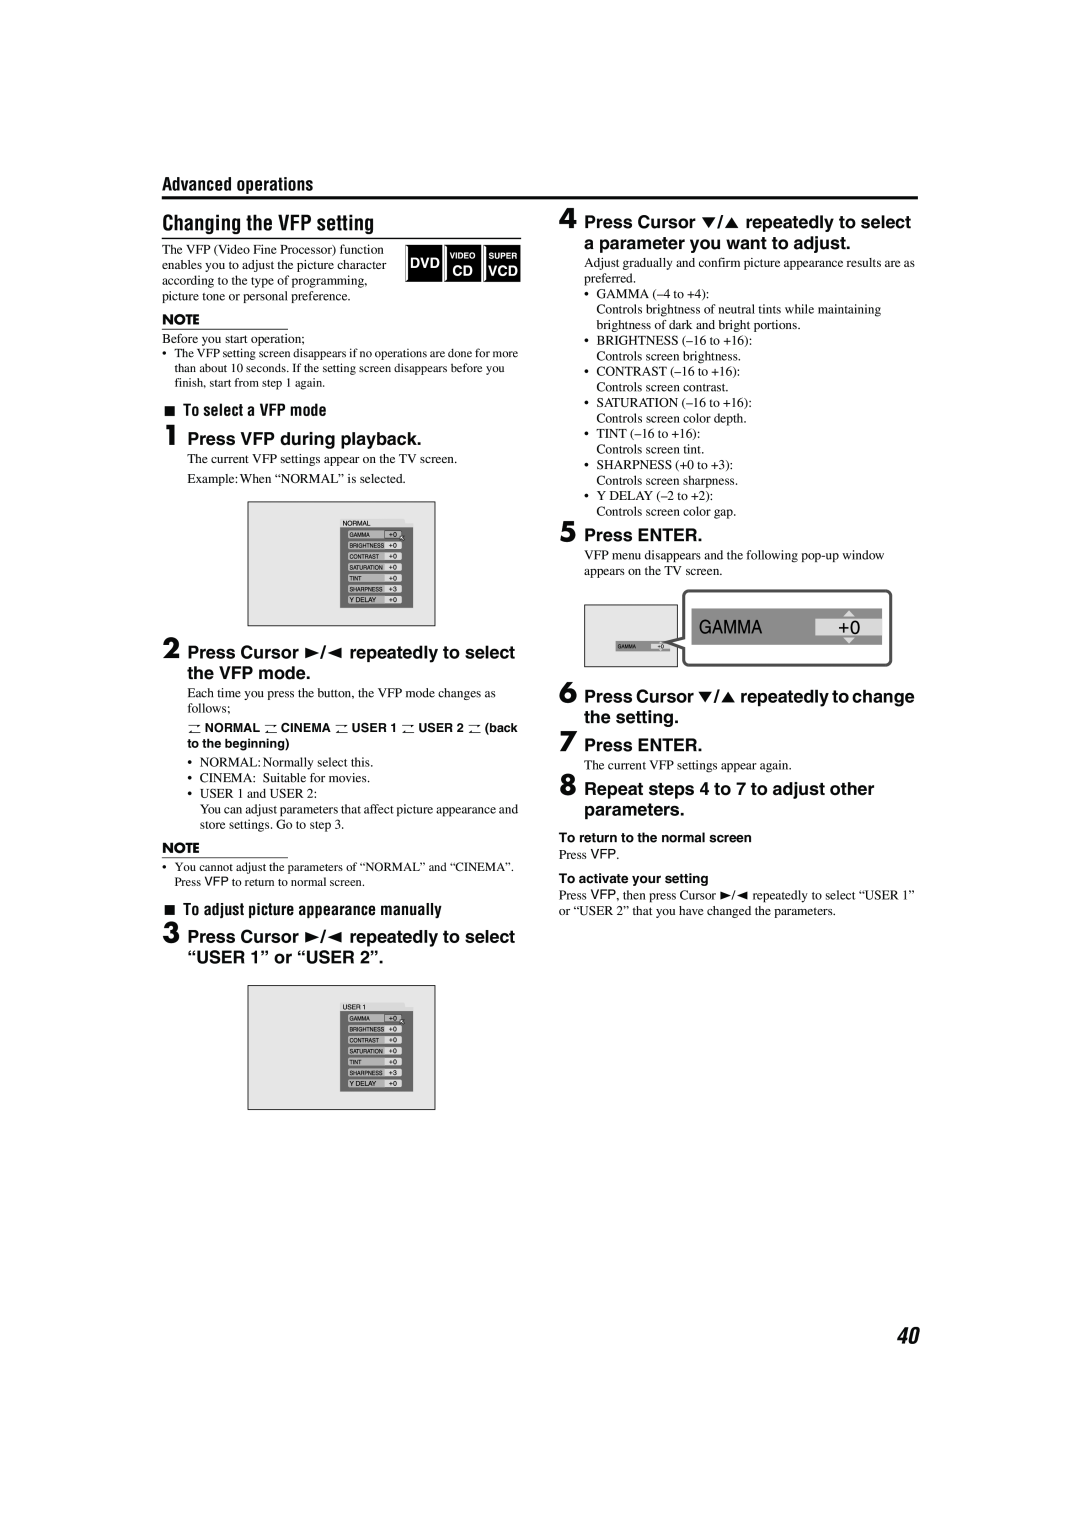 JVC TH-M42 Changing the VFP setting, Press Cursor //5 repeatedly to select, a parameter you want to adjust, Press ENTER 